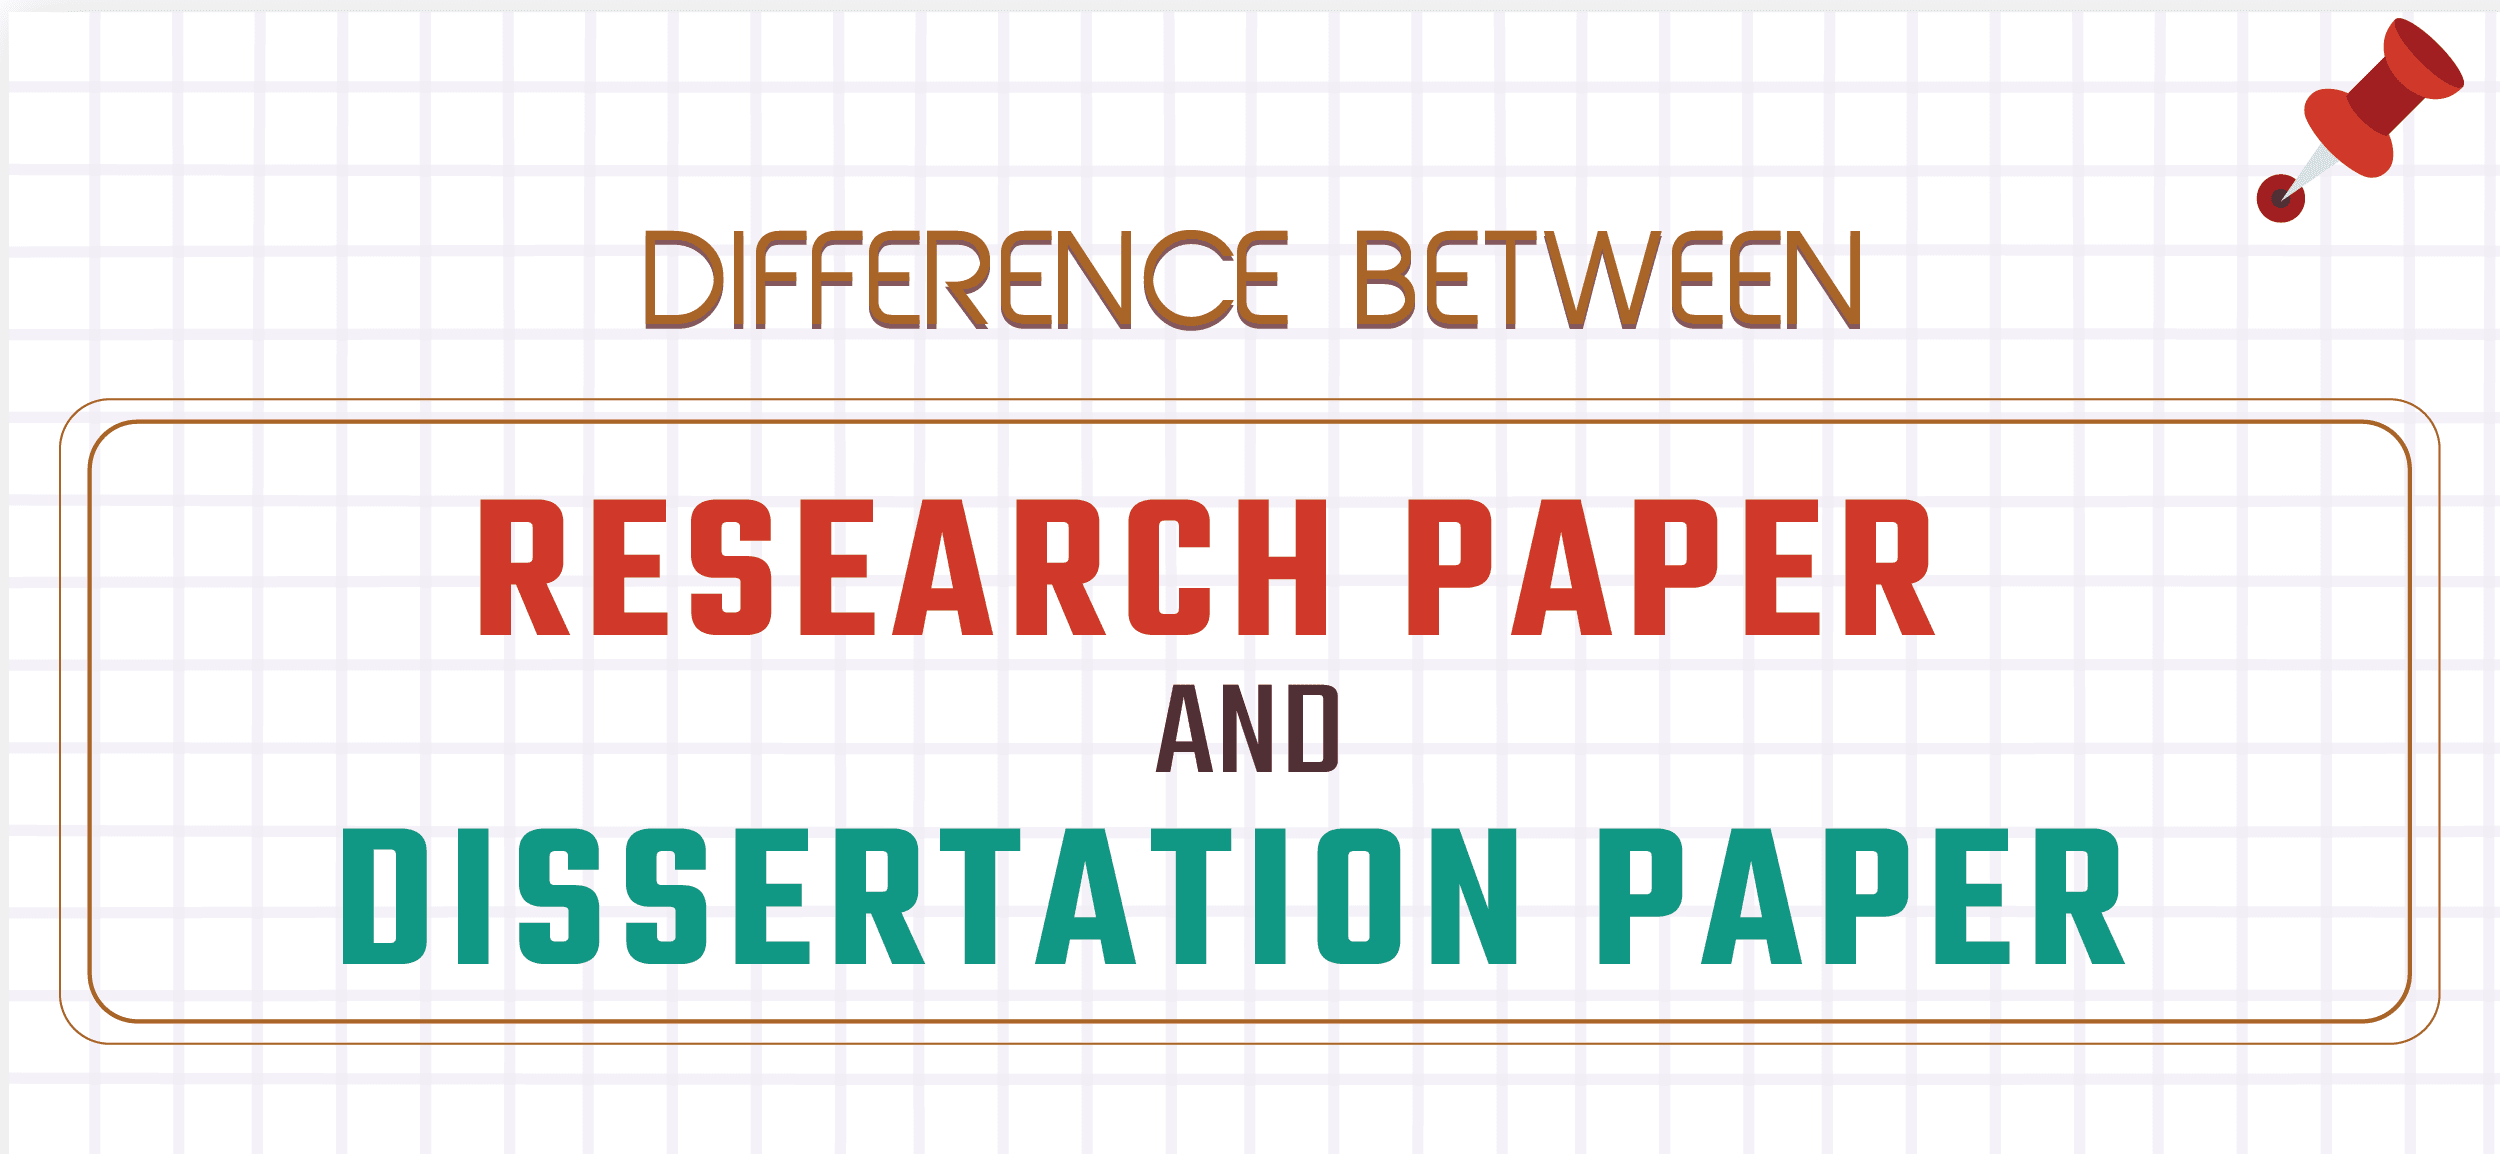 Difference Between Research Paper and Dissertation Paper